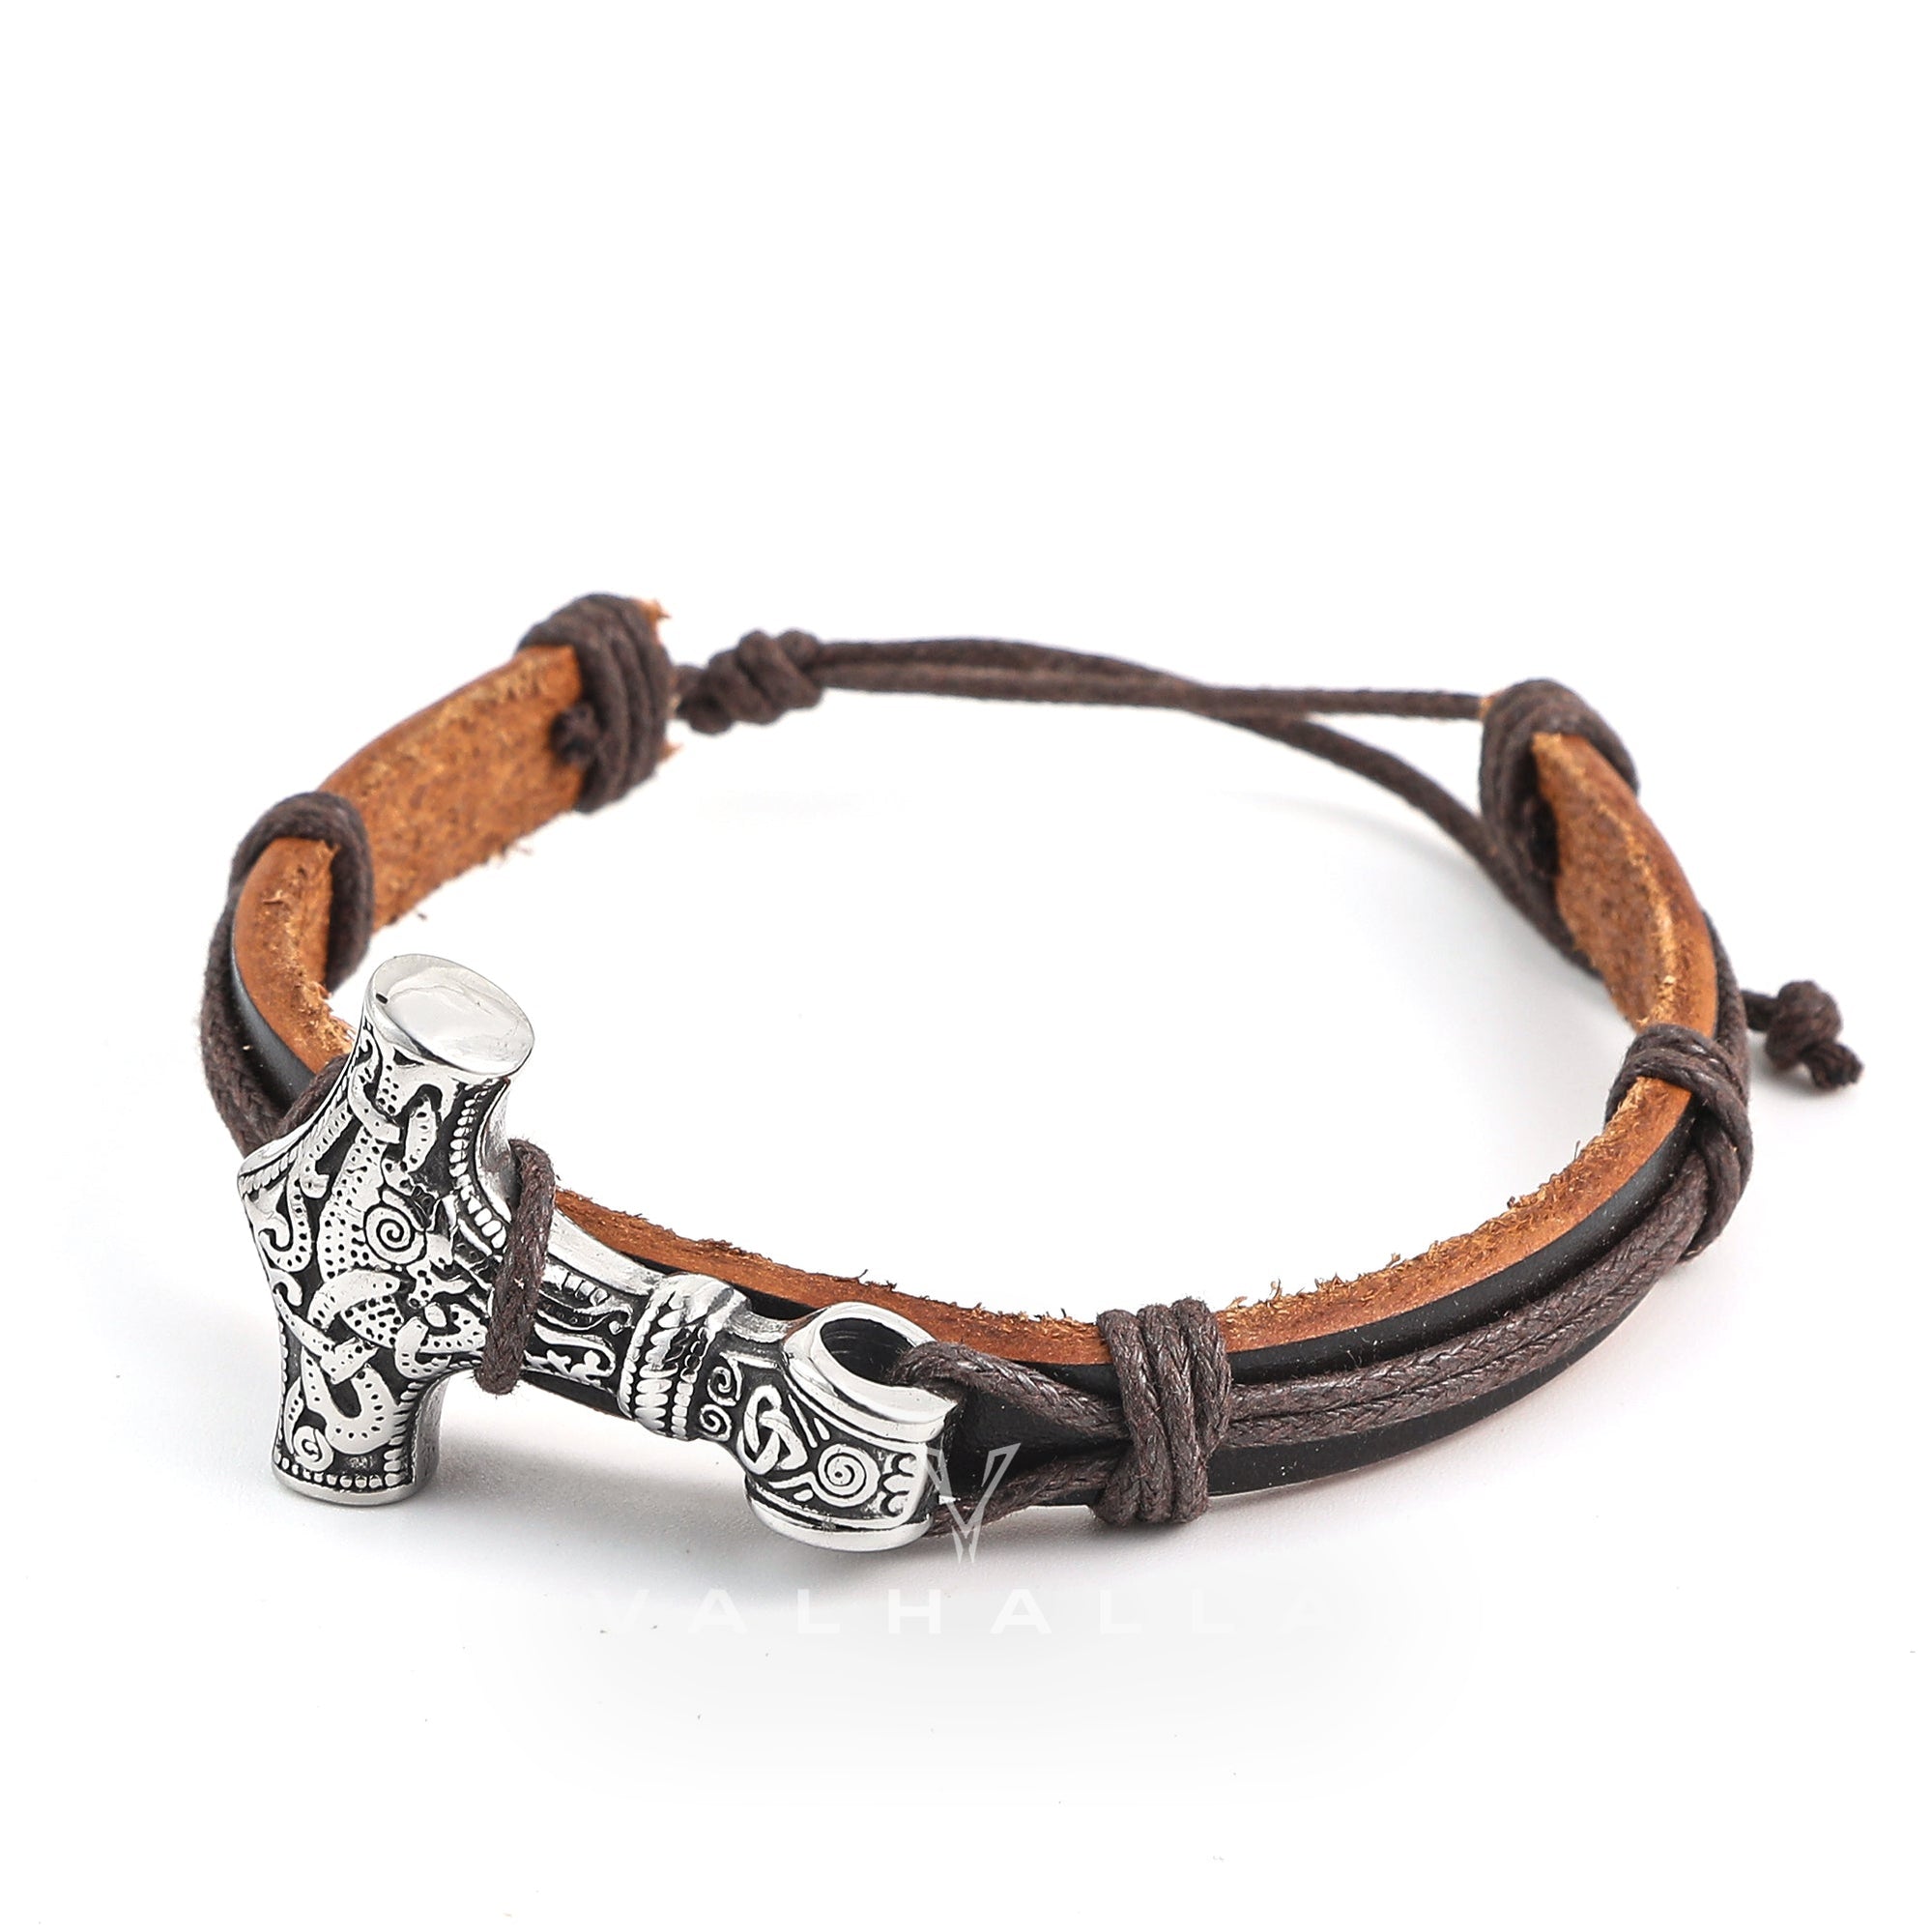 Adjustable Leather Wristband With Handcrafted Stainless Steel Mjolnir